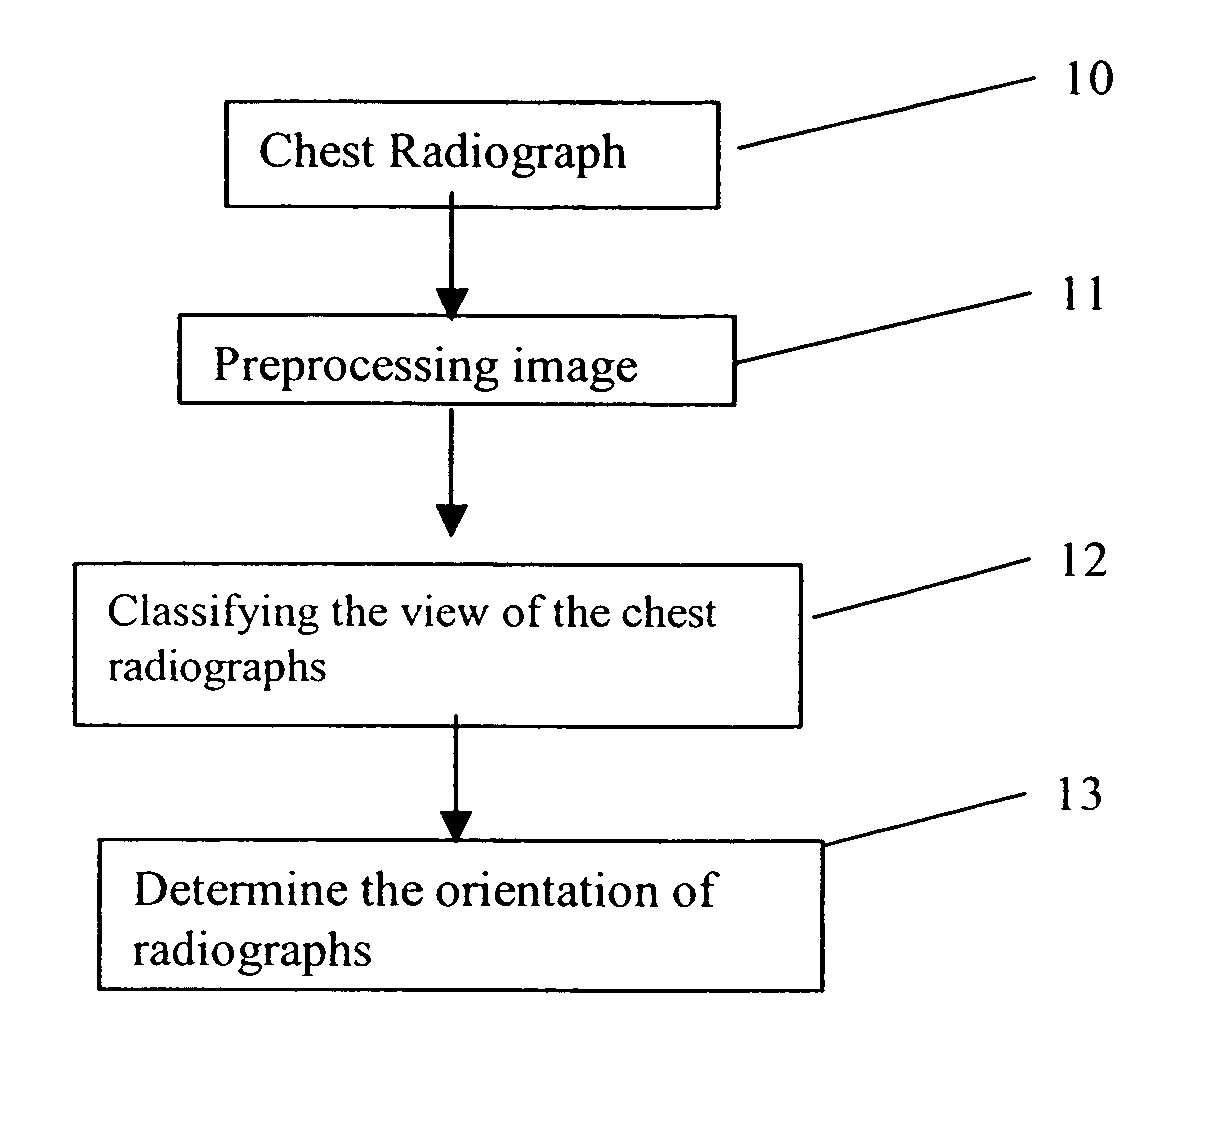 Method for computer recognition of projection views and orientation of chest radiographs